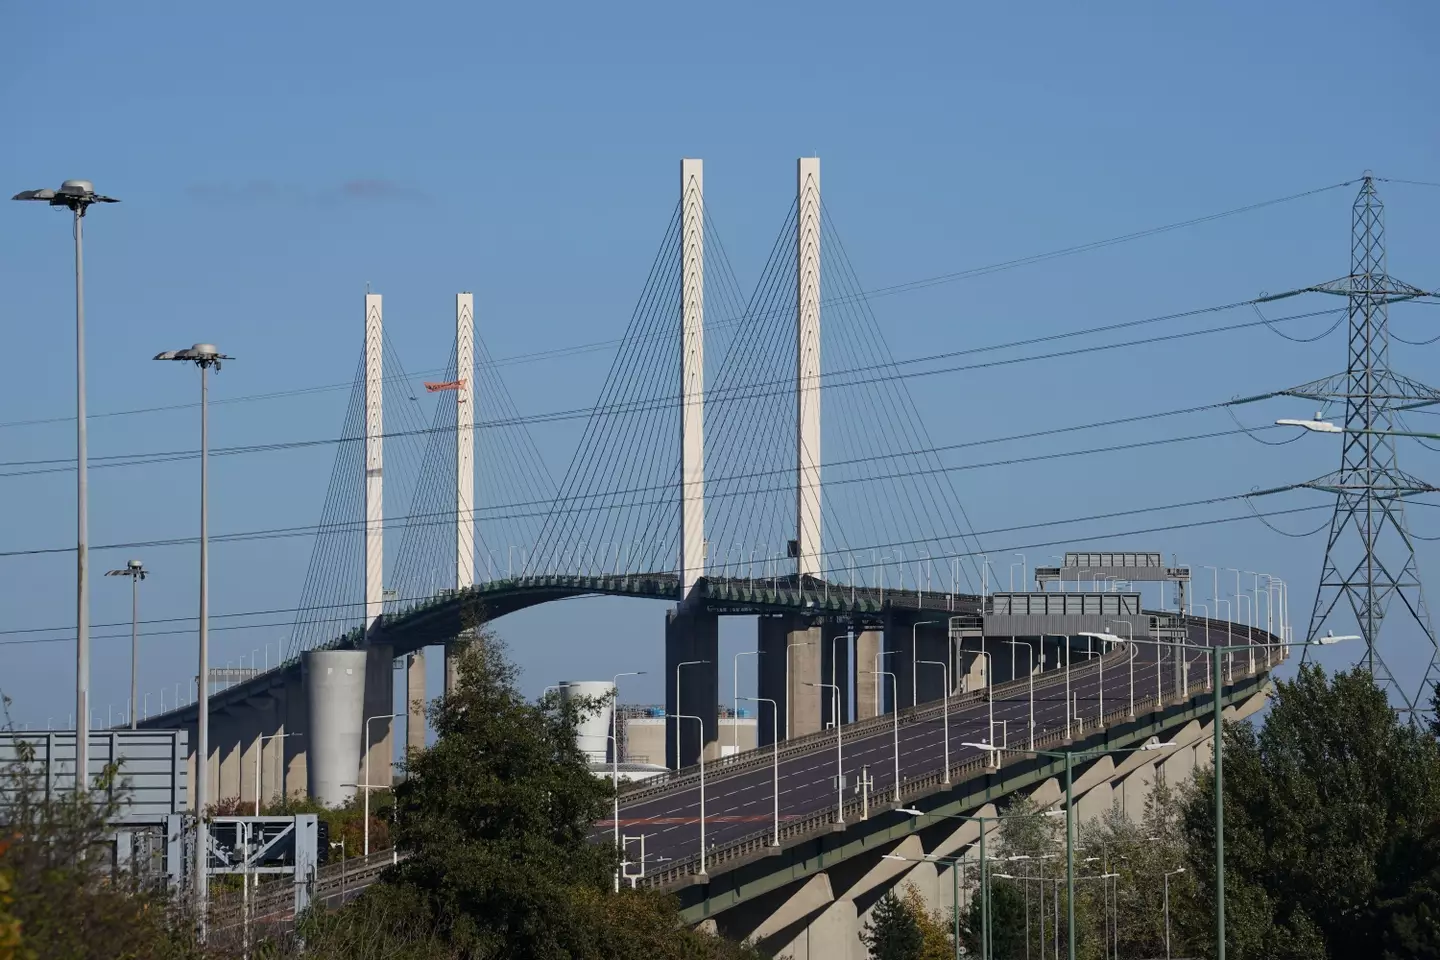 The protesters scaled the Dartford Crossing.